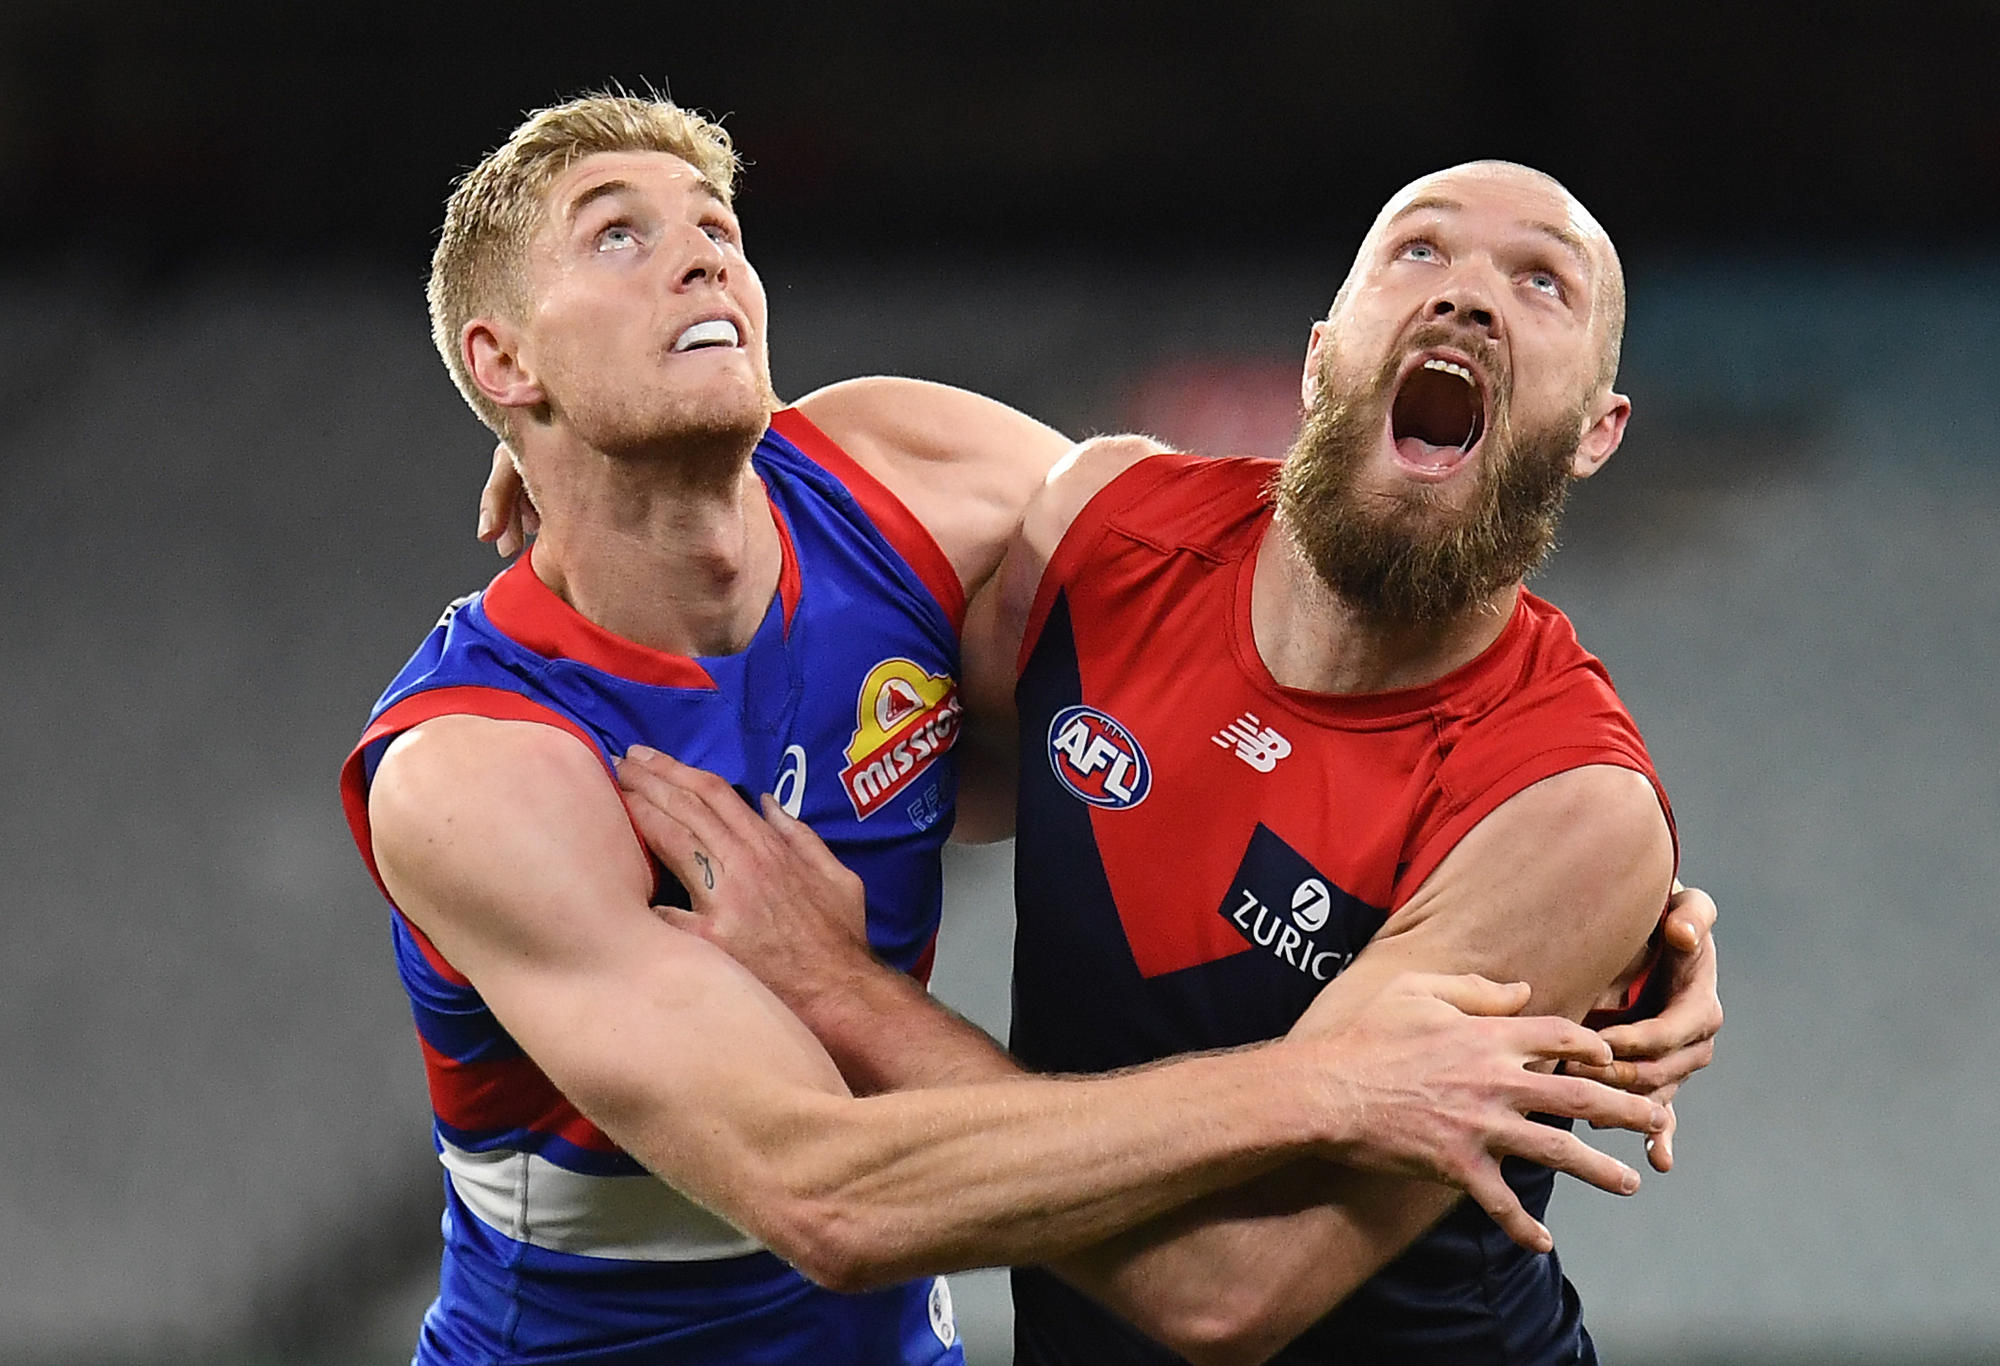 Tim English of the Bulldogs and Max Gawn of the Demons compete for the bal;